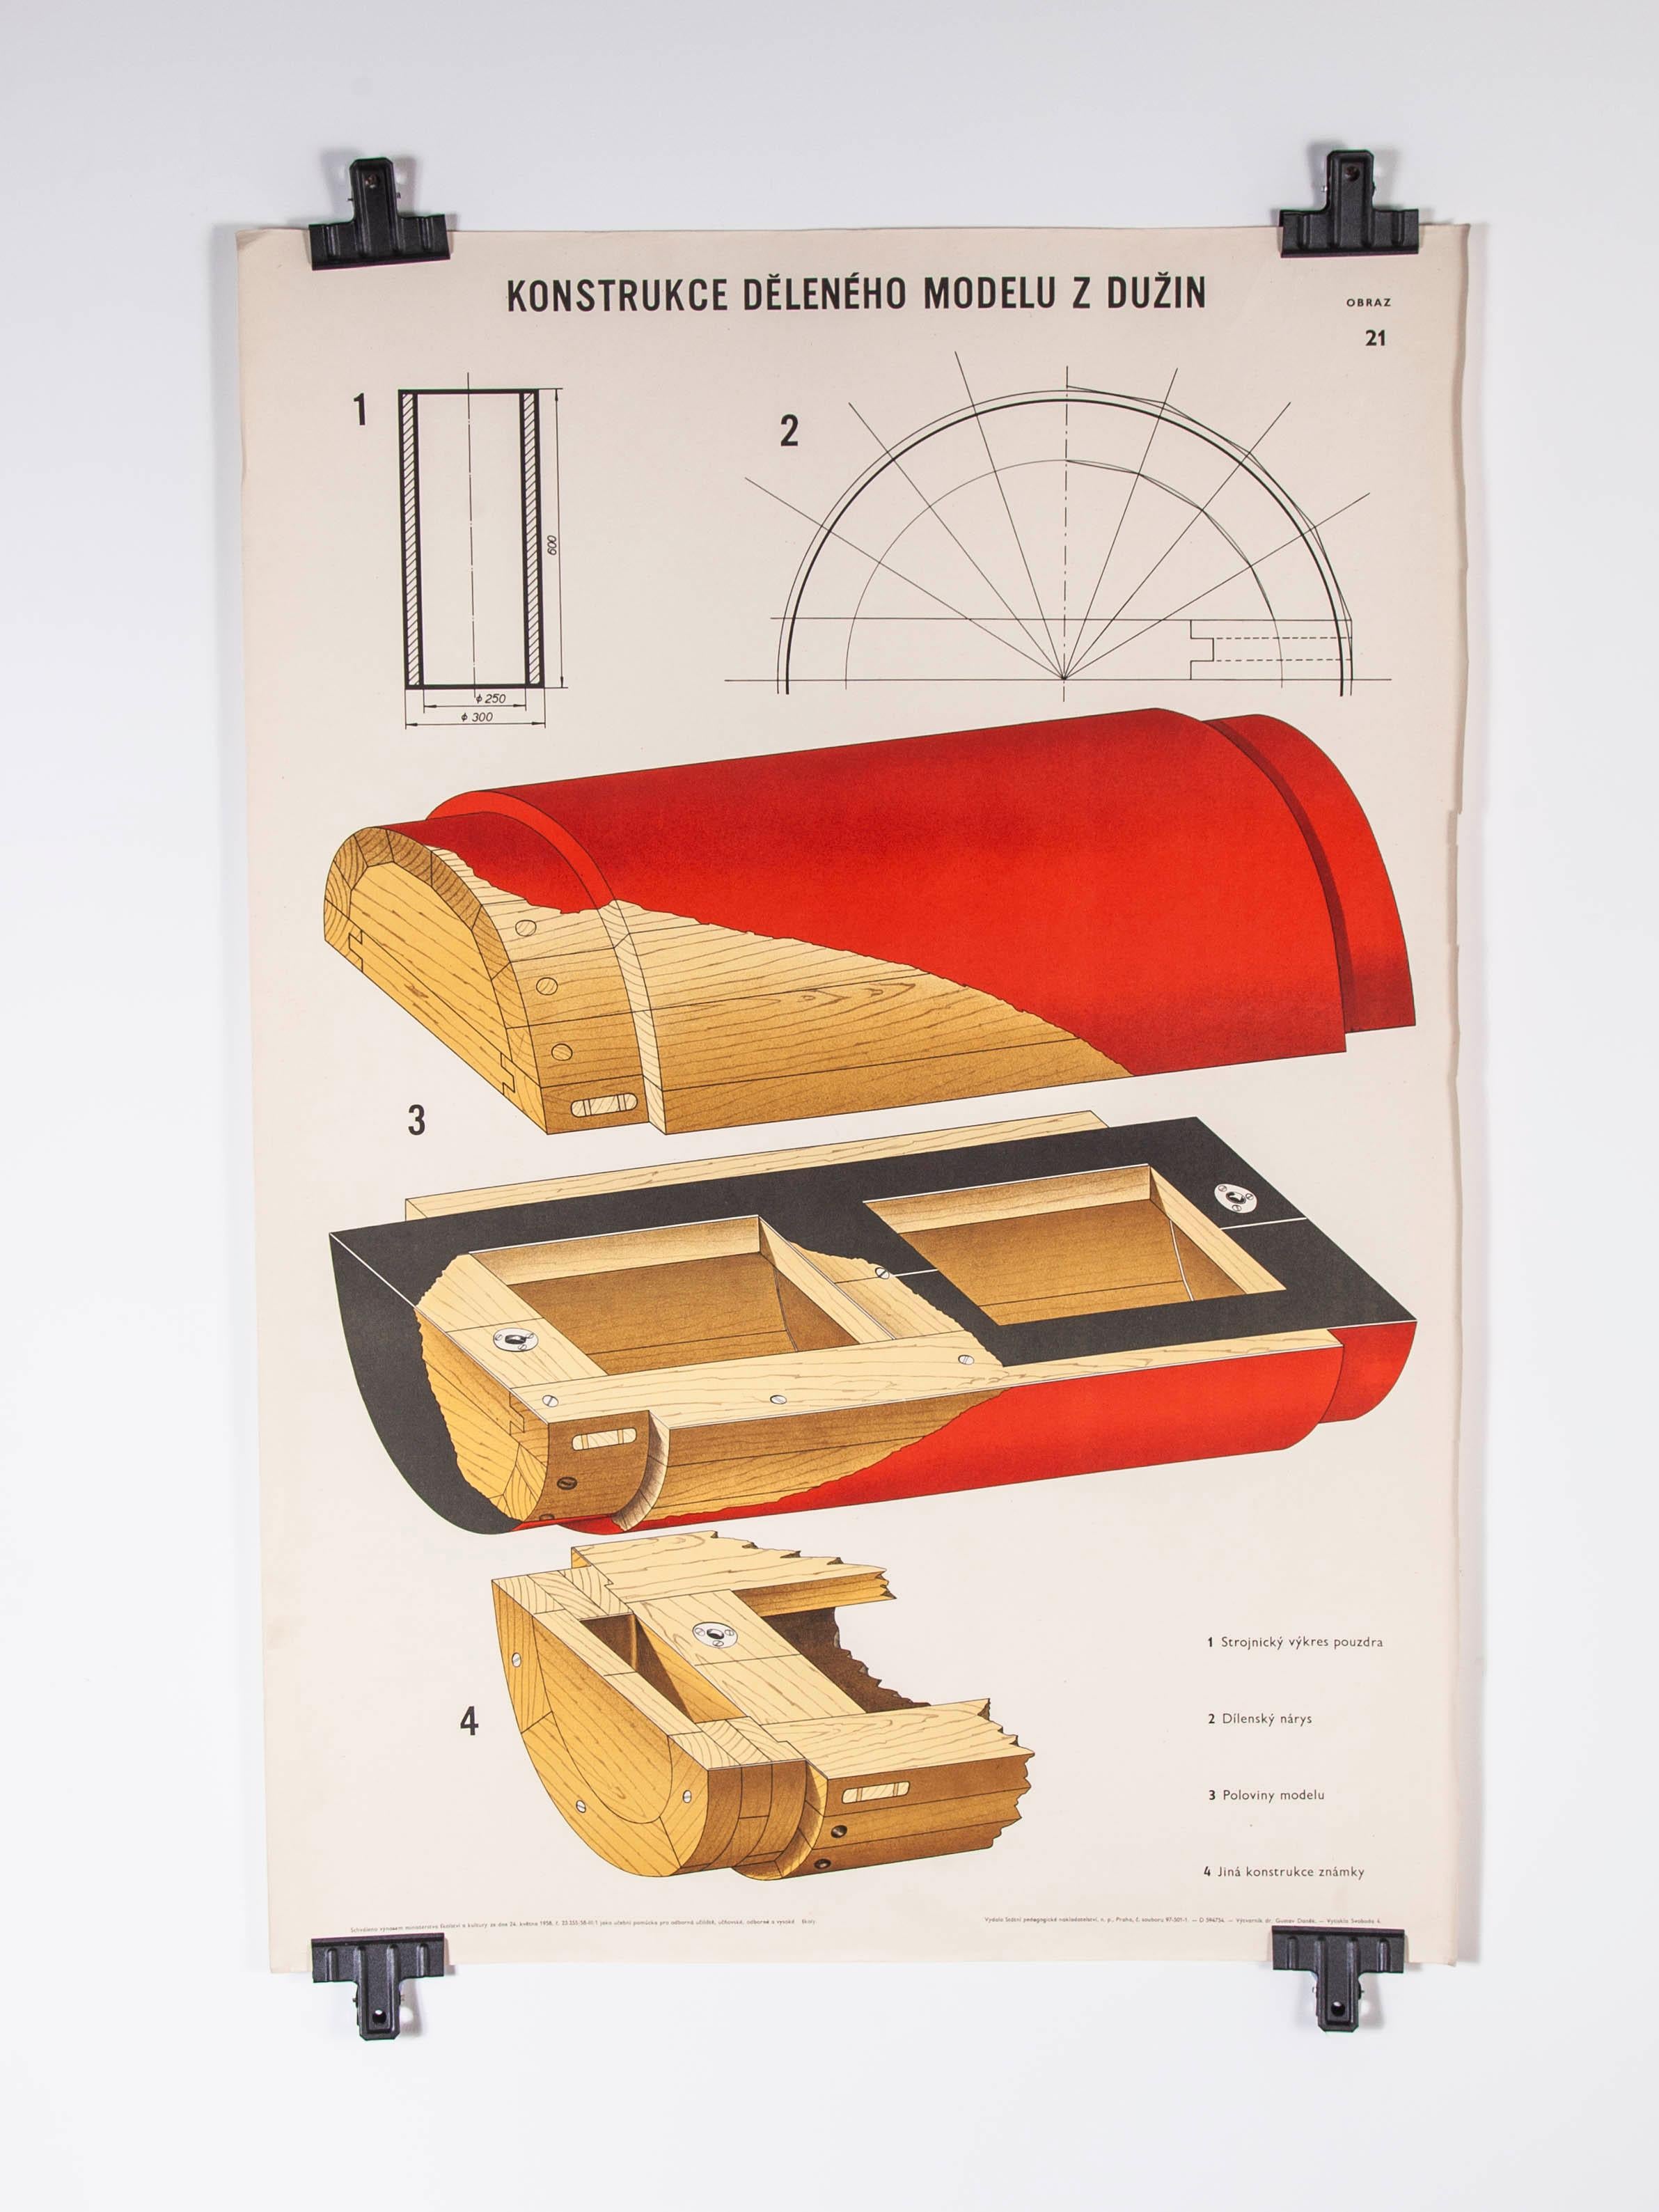 Czech technical industrial drawing – foundry mould engineering poster – 21

Sourced from an old engineering workshop in the Czech Republic, an amazing series of technical industrial drawings explaining the process of sand casting and creating the